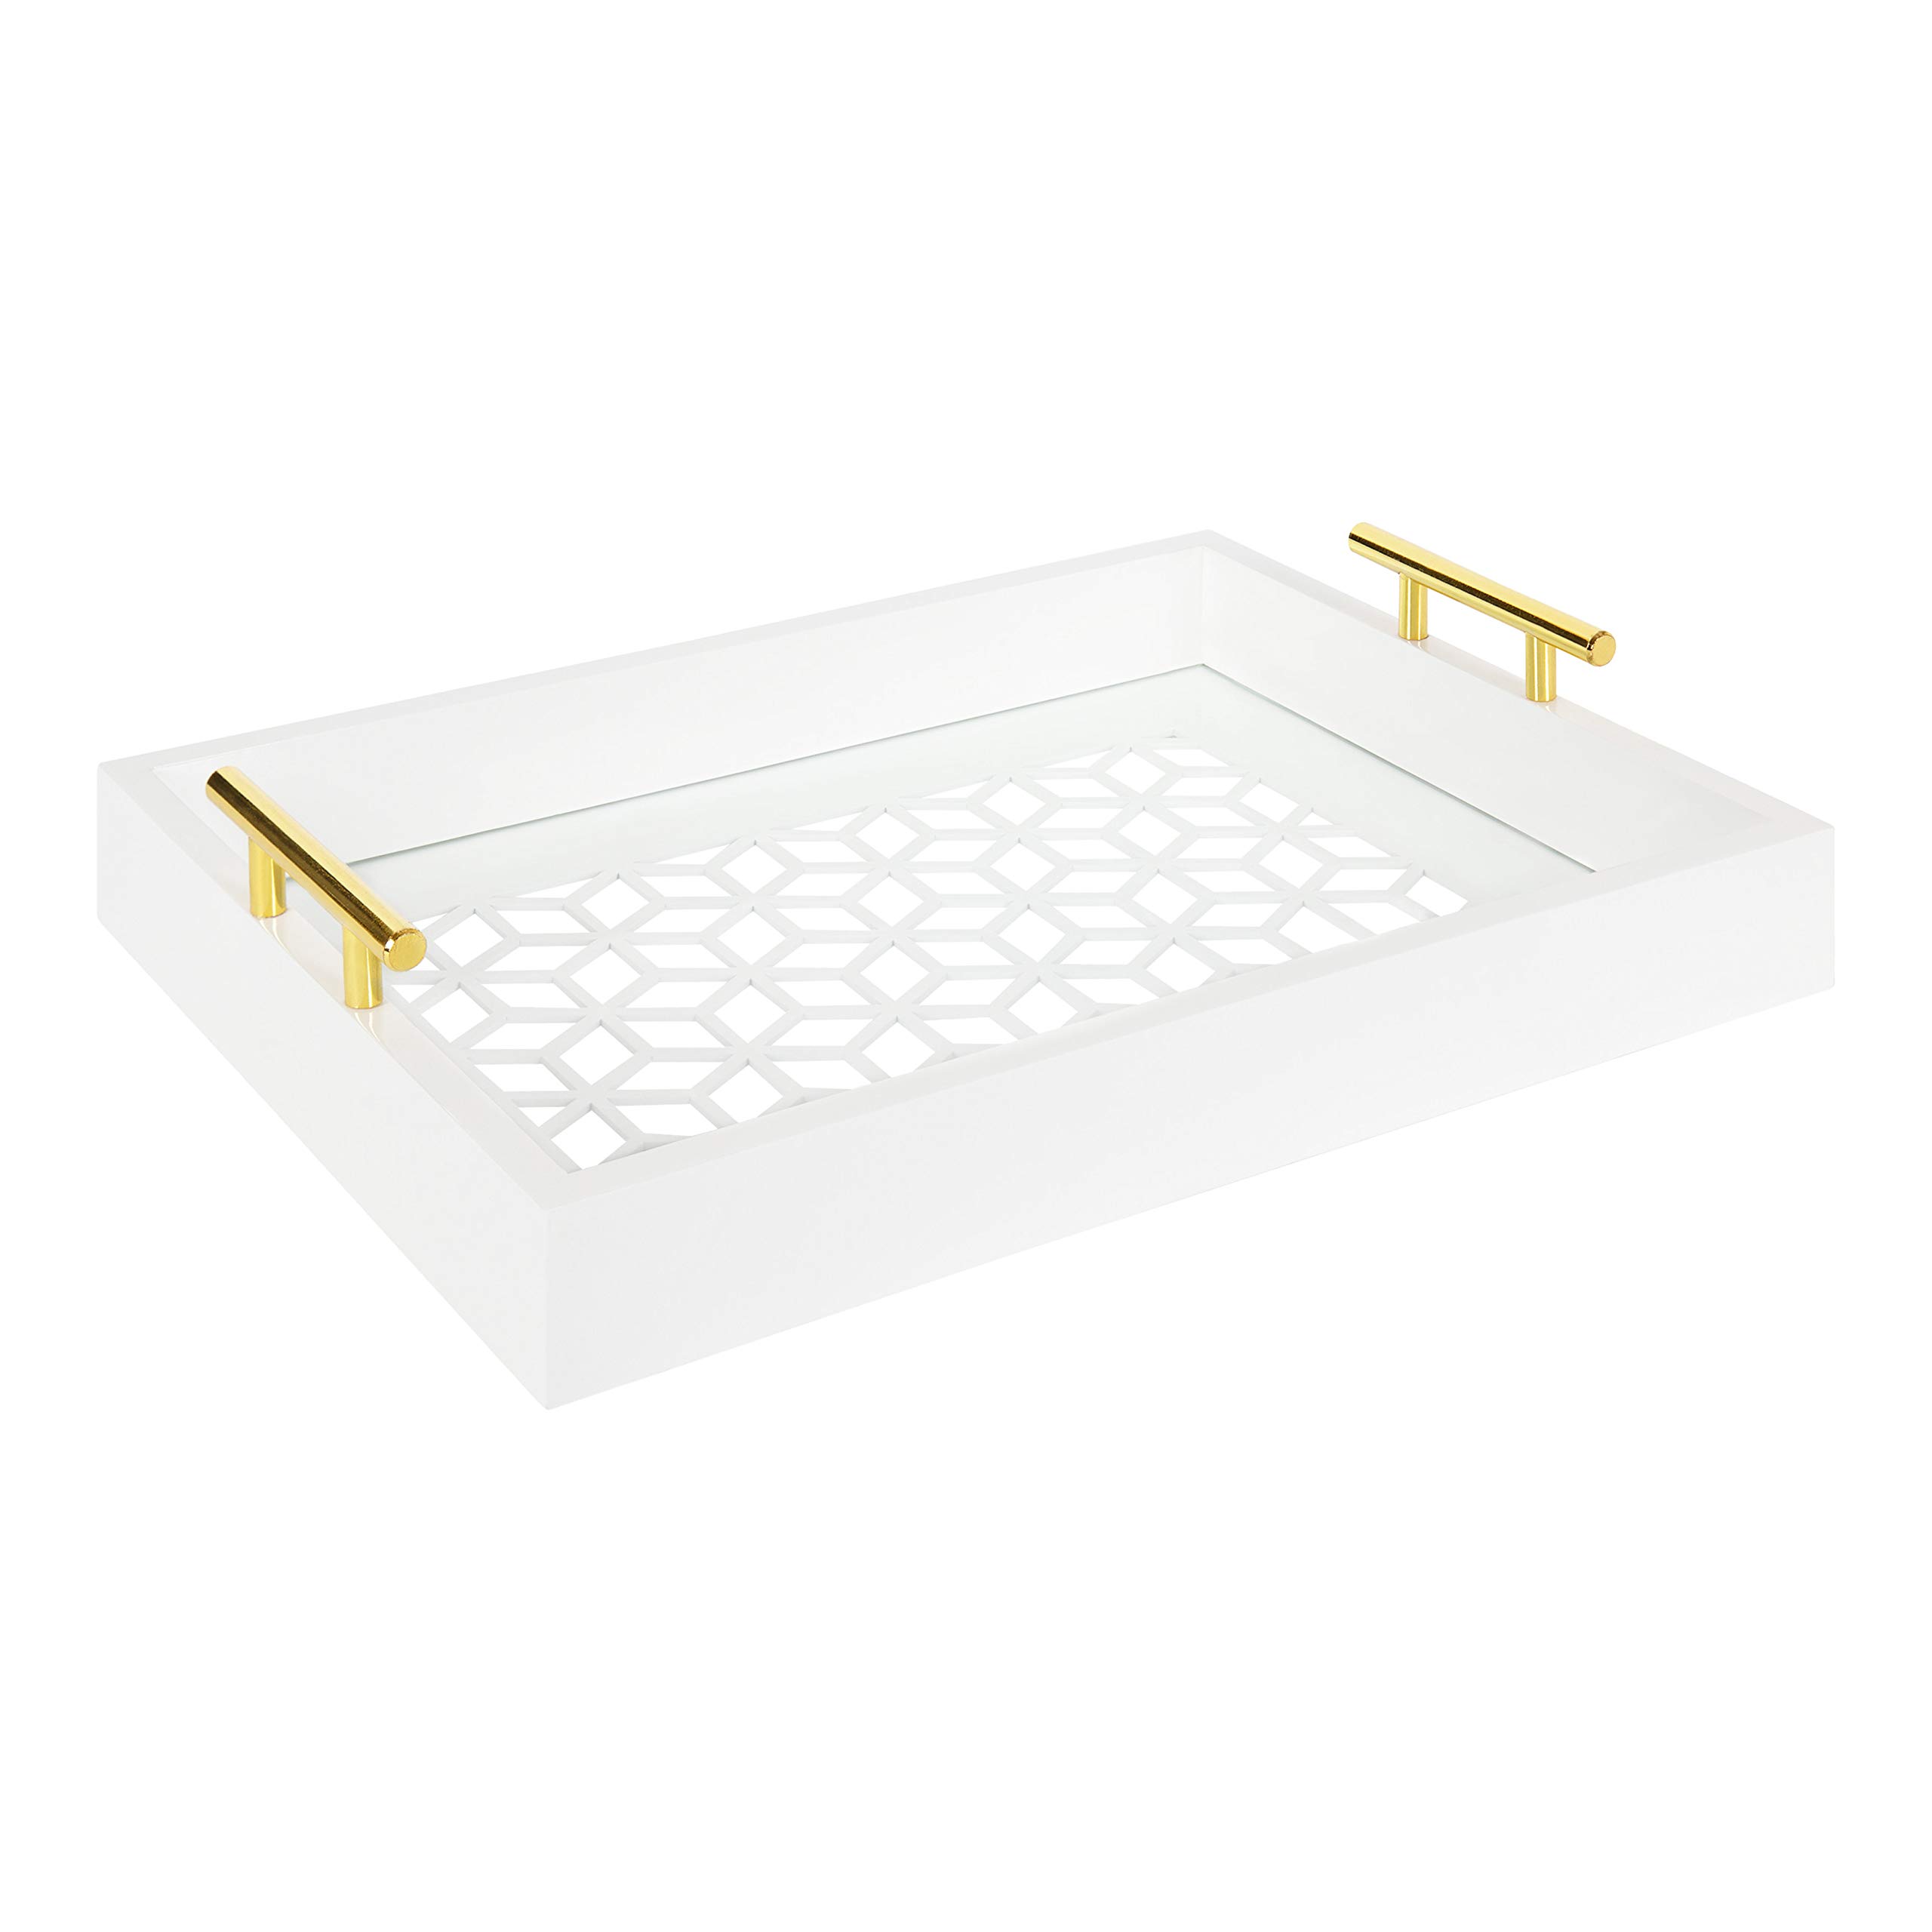 Kate and Laurel Caspen Rectangle Cut Out Pattern Decorative Tray with Gold Metal Handles, 16.5" x12.25", White and Gold